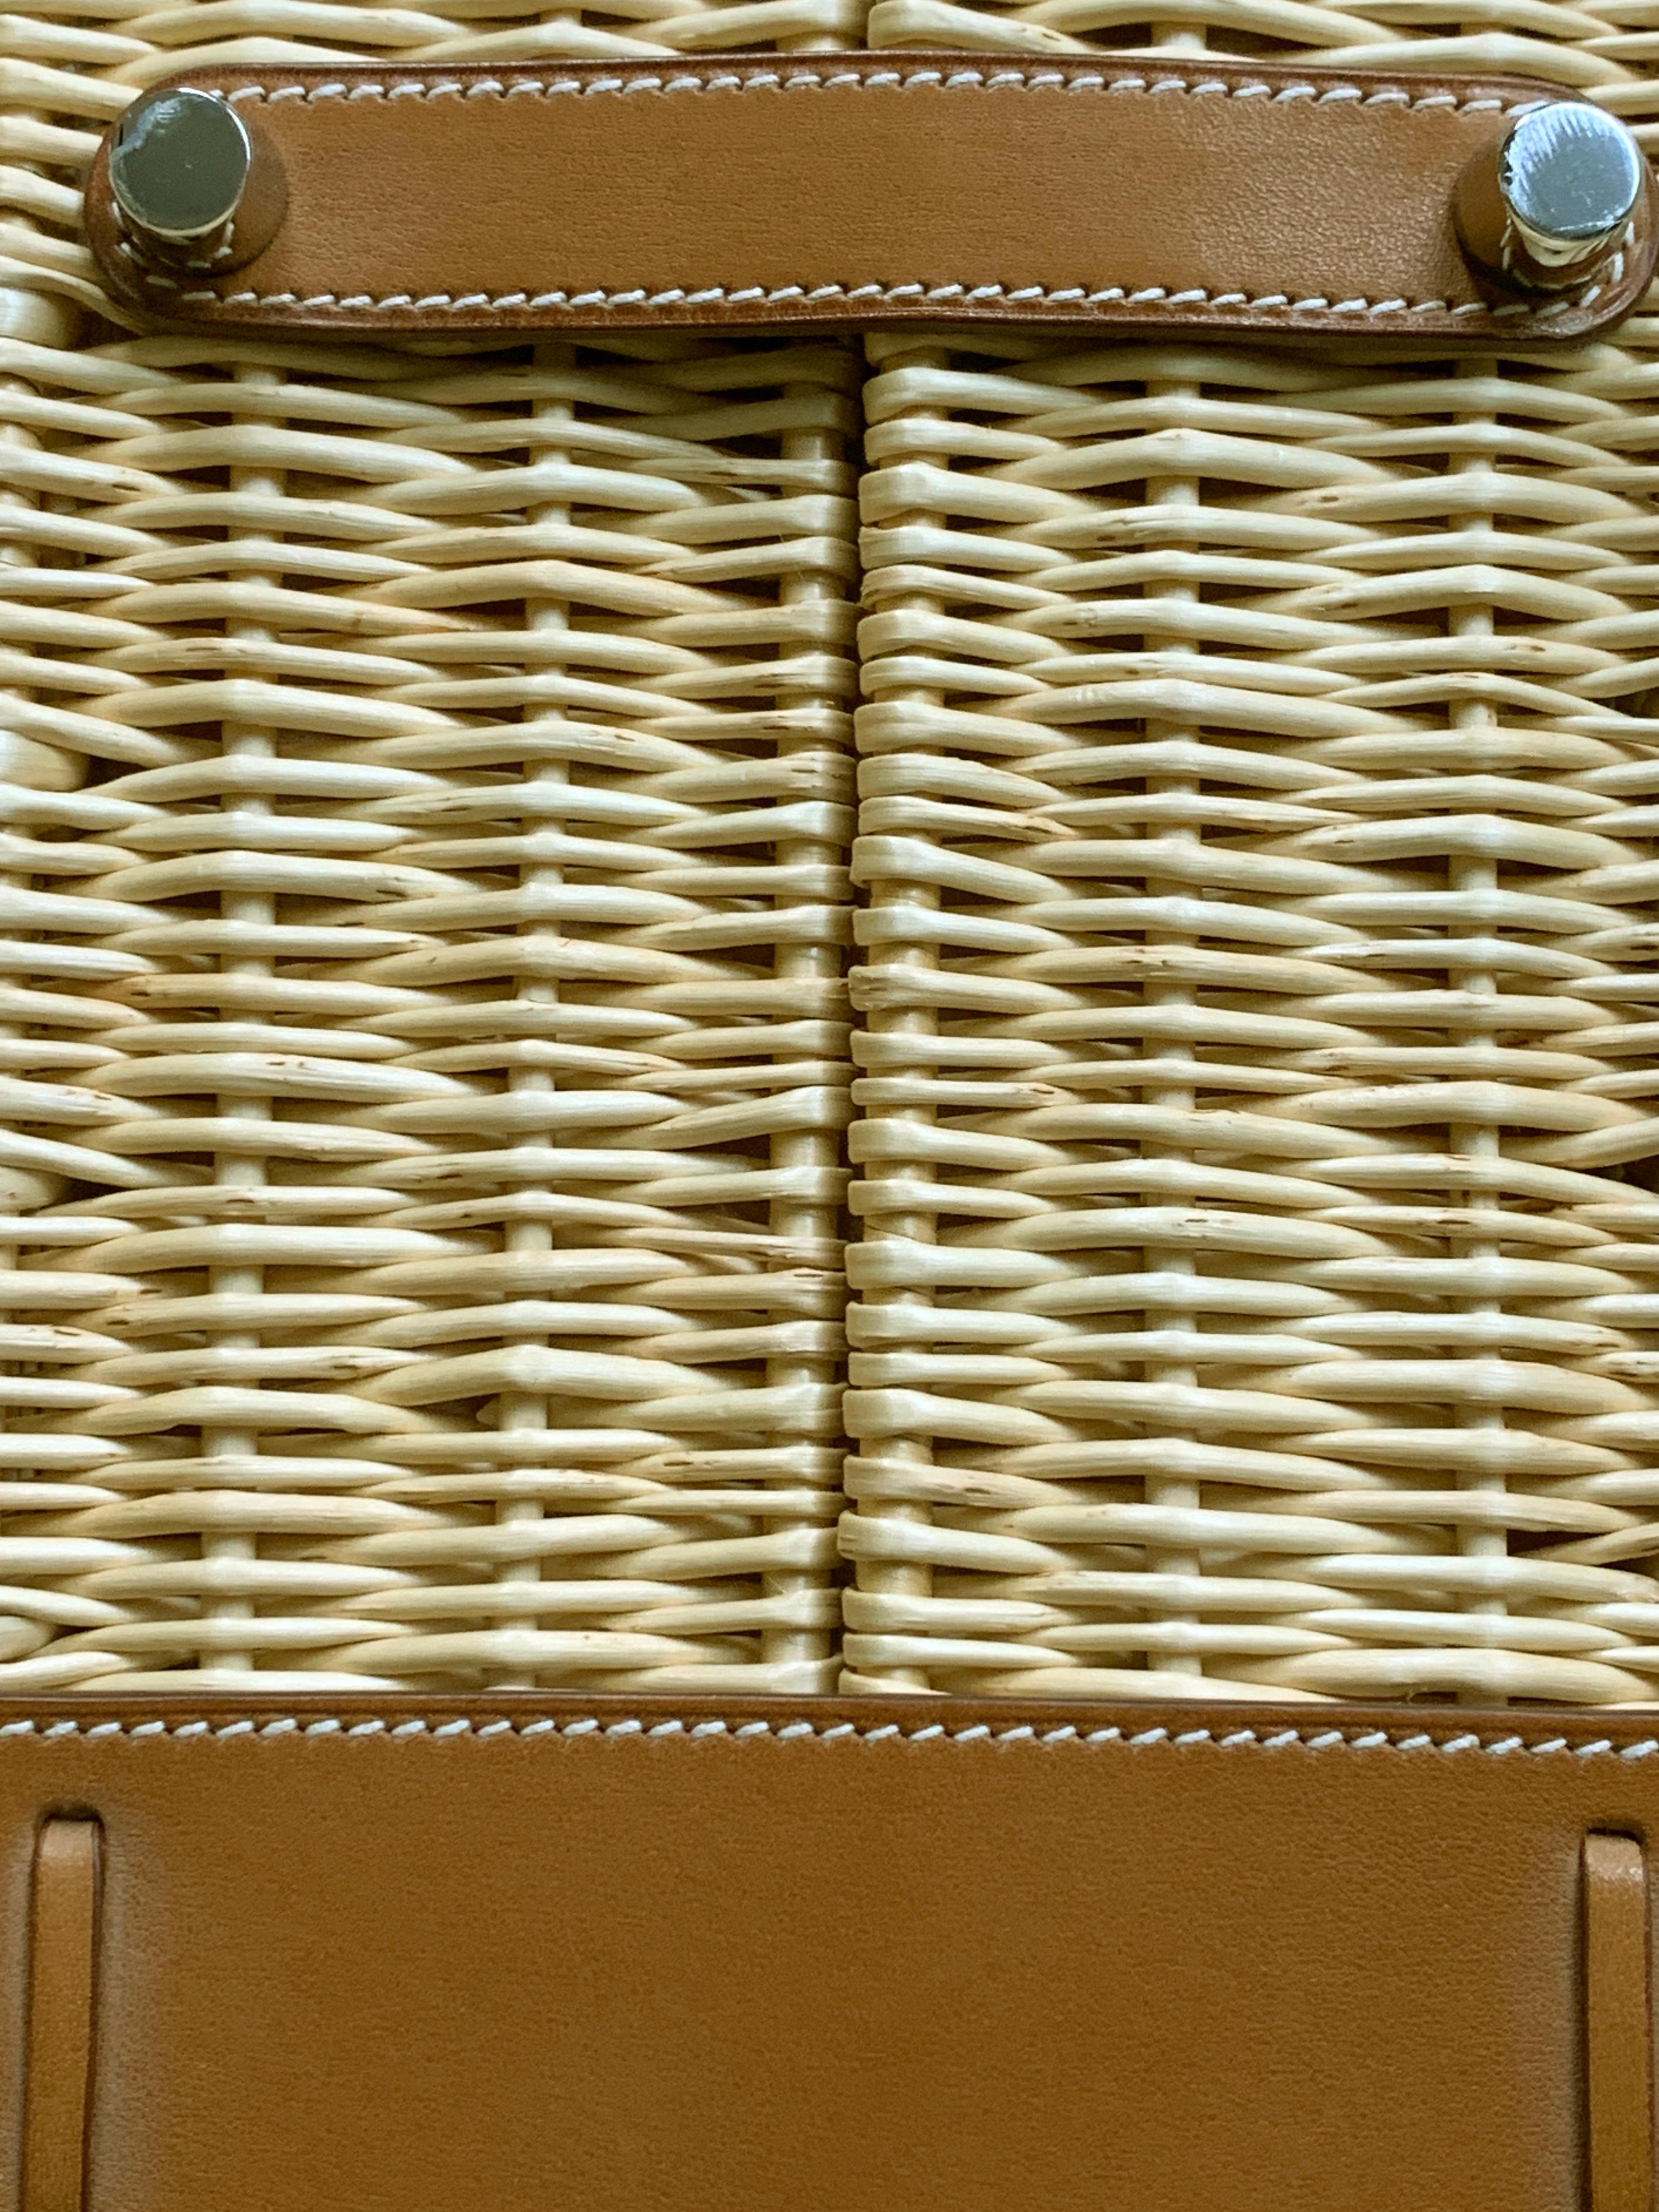 Brown HERMES 35cm Barénia Fauvre Straw Kelly Picnic Bag Natural